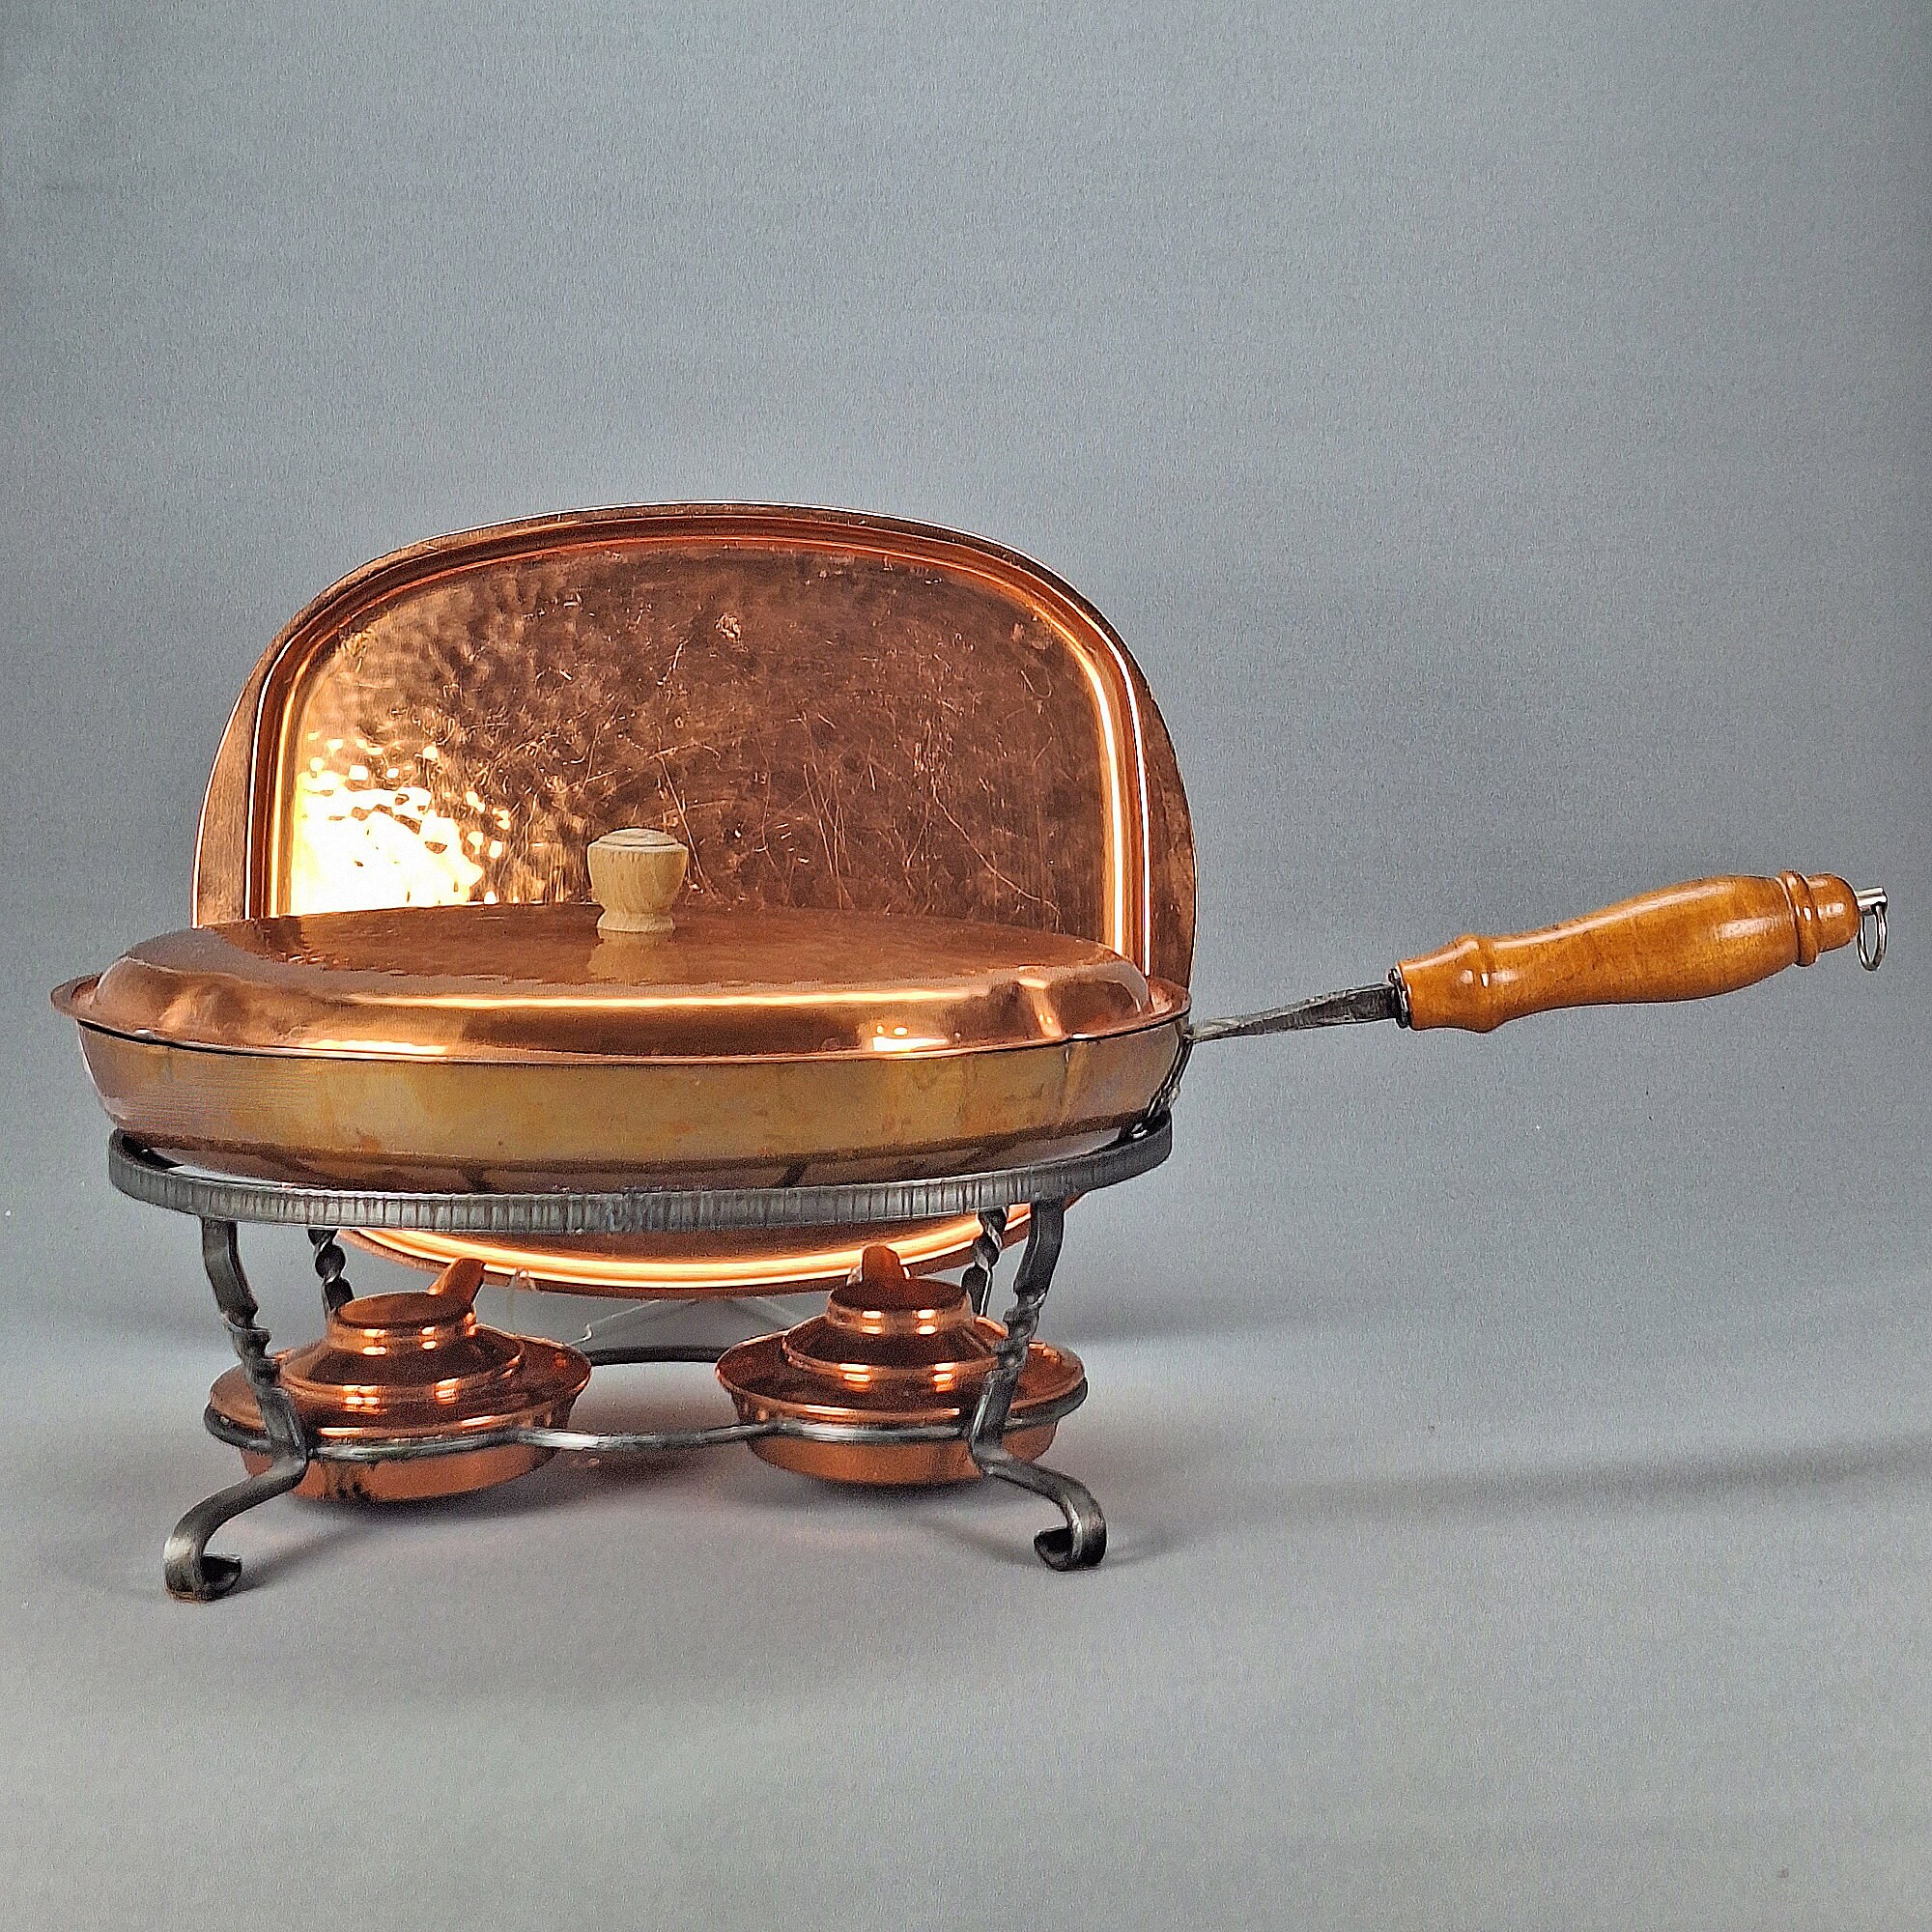 Swiss copper Stockli Netstal fuel burner warming stand stove for fondue pot  or chafing dish